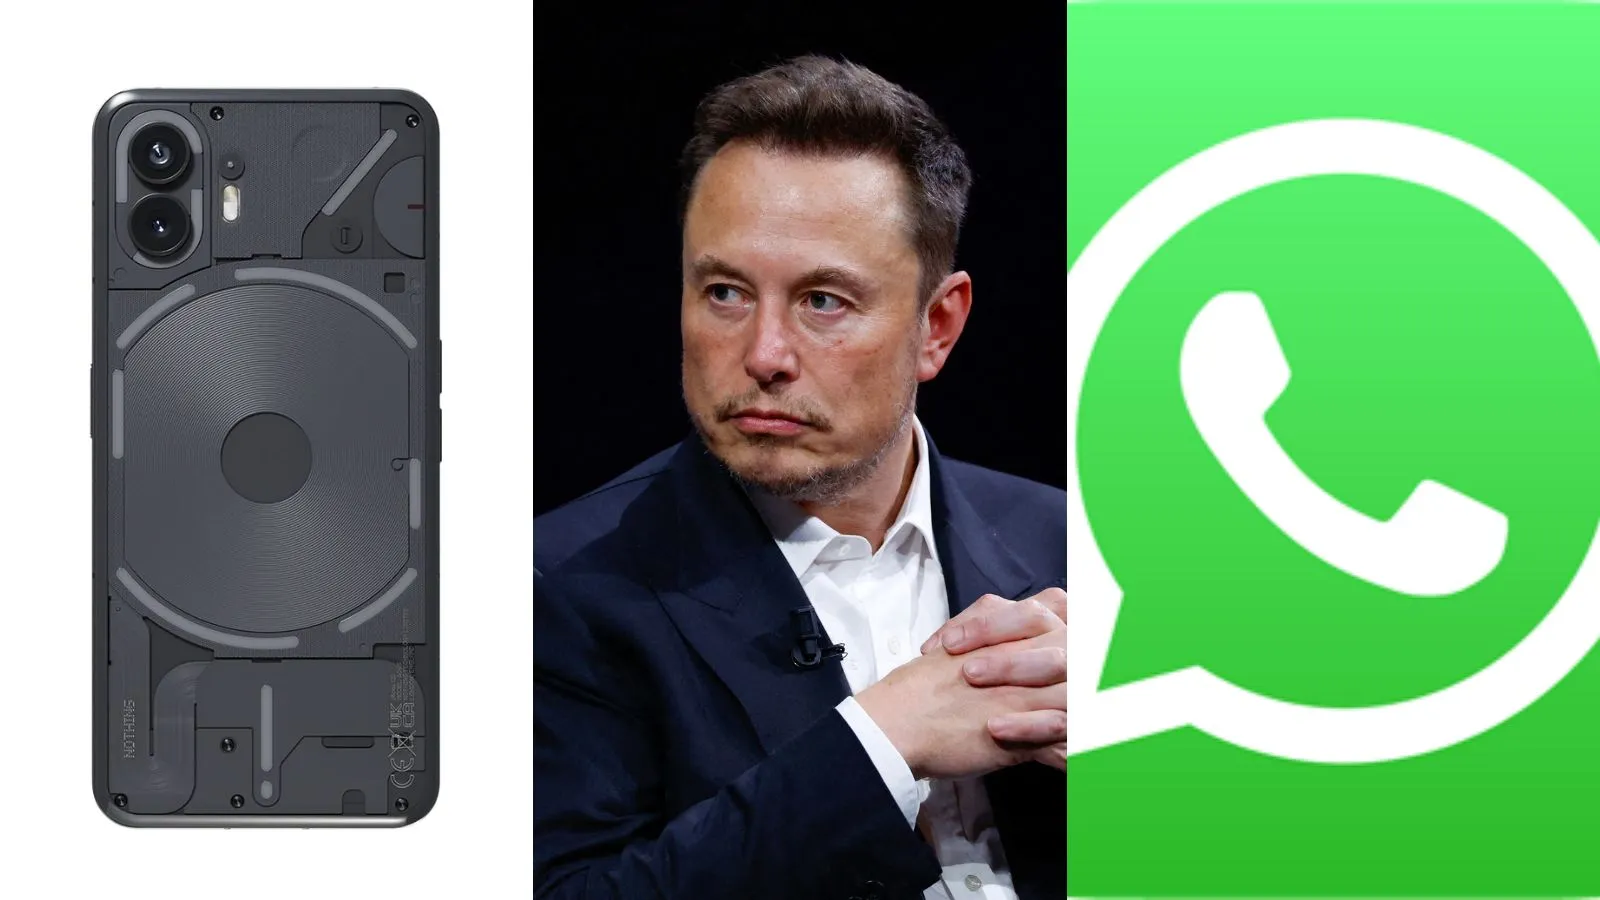 Tech News Today: Nothing Phone 2 price slashed permanently, Elon Musk asks advertisers to buzz off | Technology News